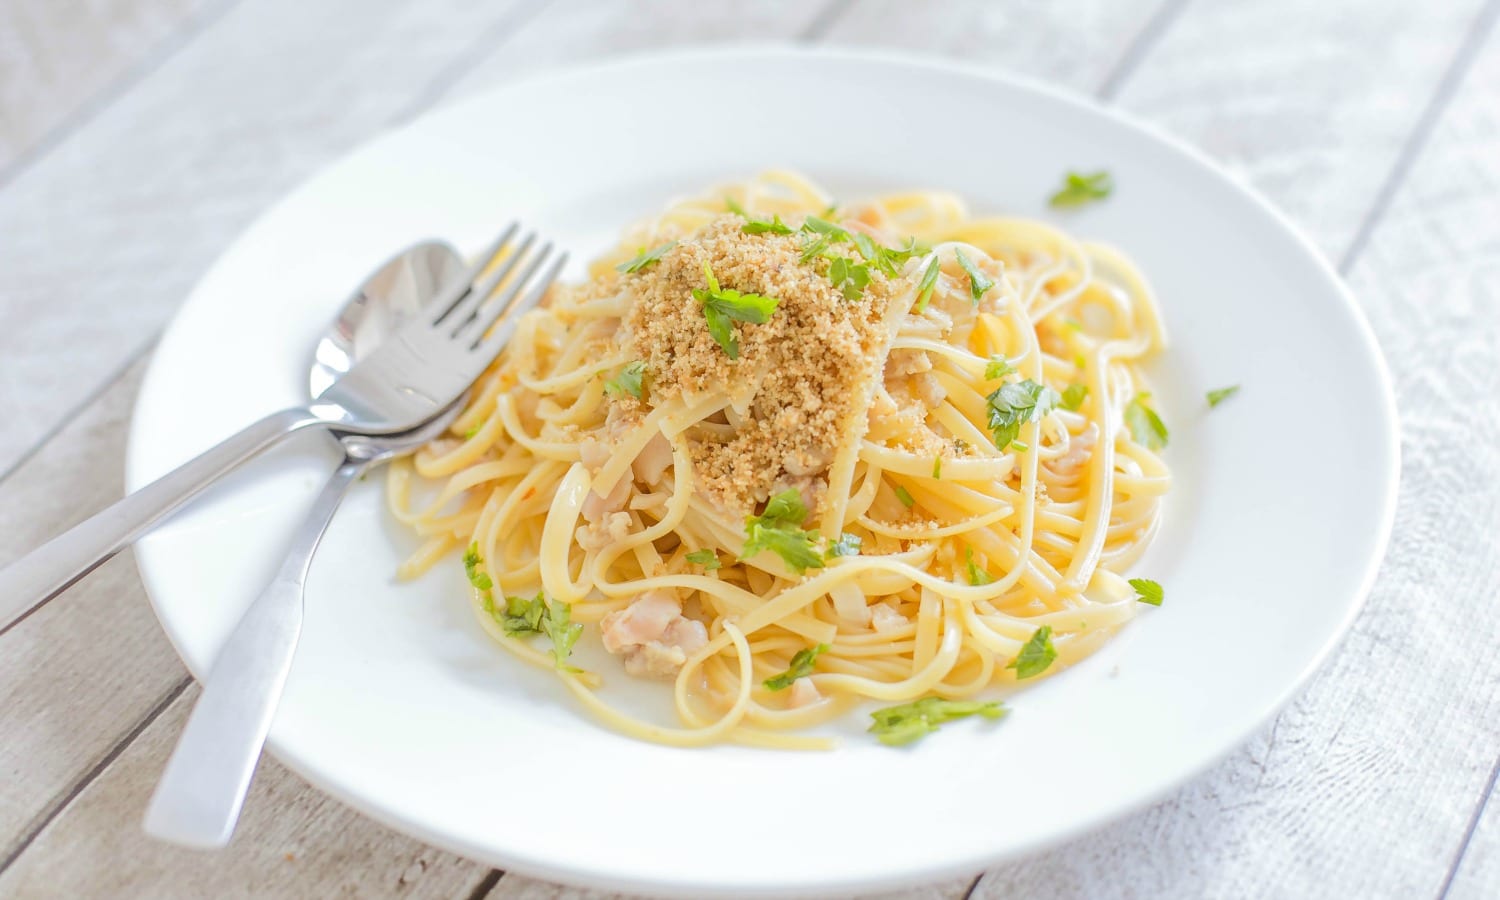 Serve the One Pot Pasta and Clam Sauce in bowls, top with crunchy bread crumbs and fresh parsley, enjoy!